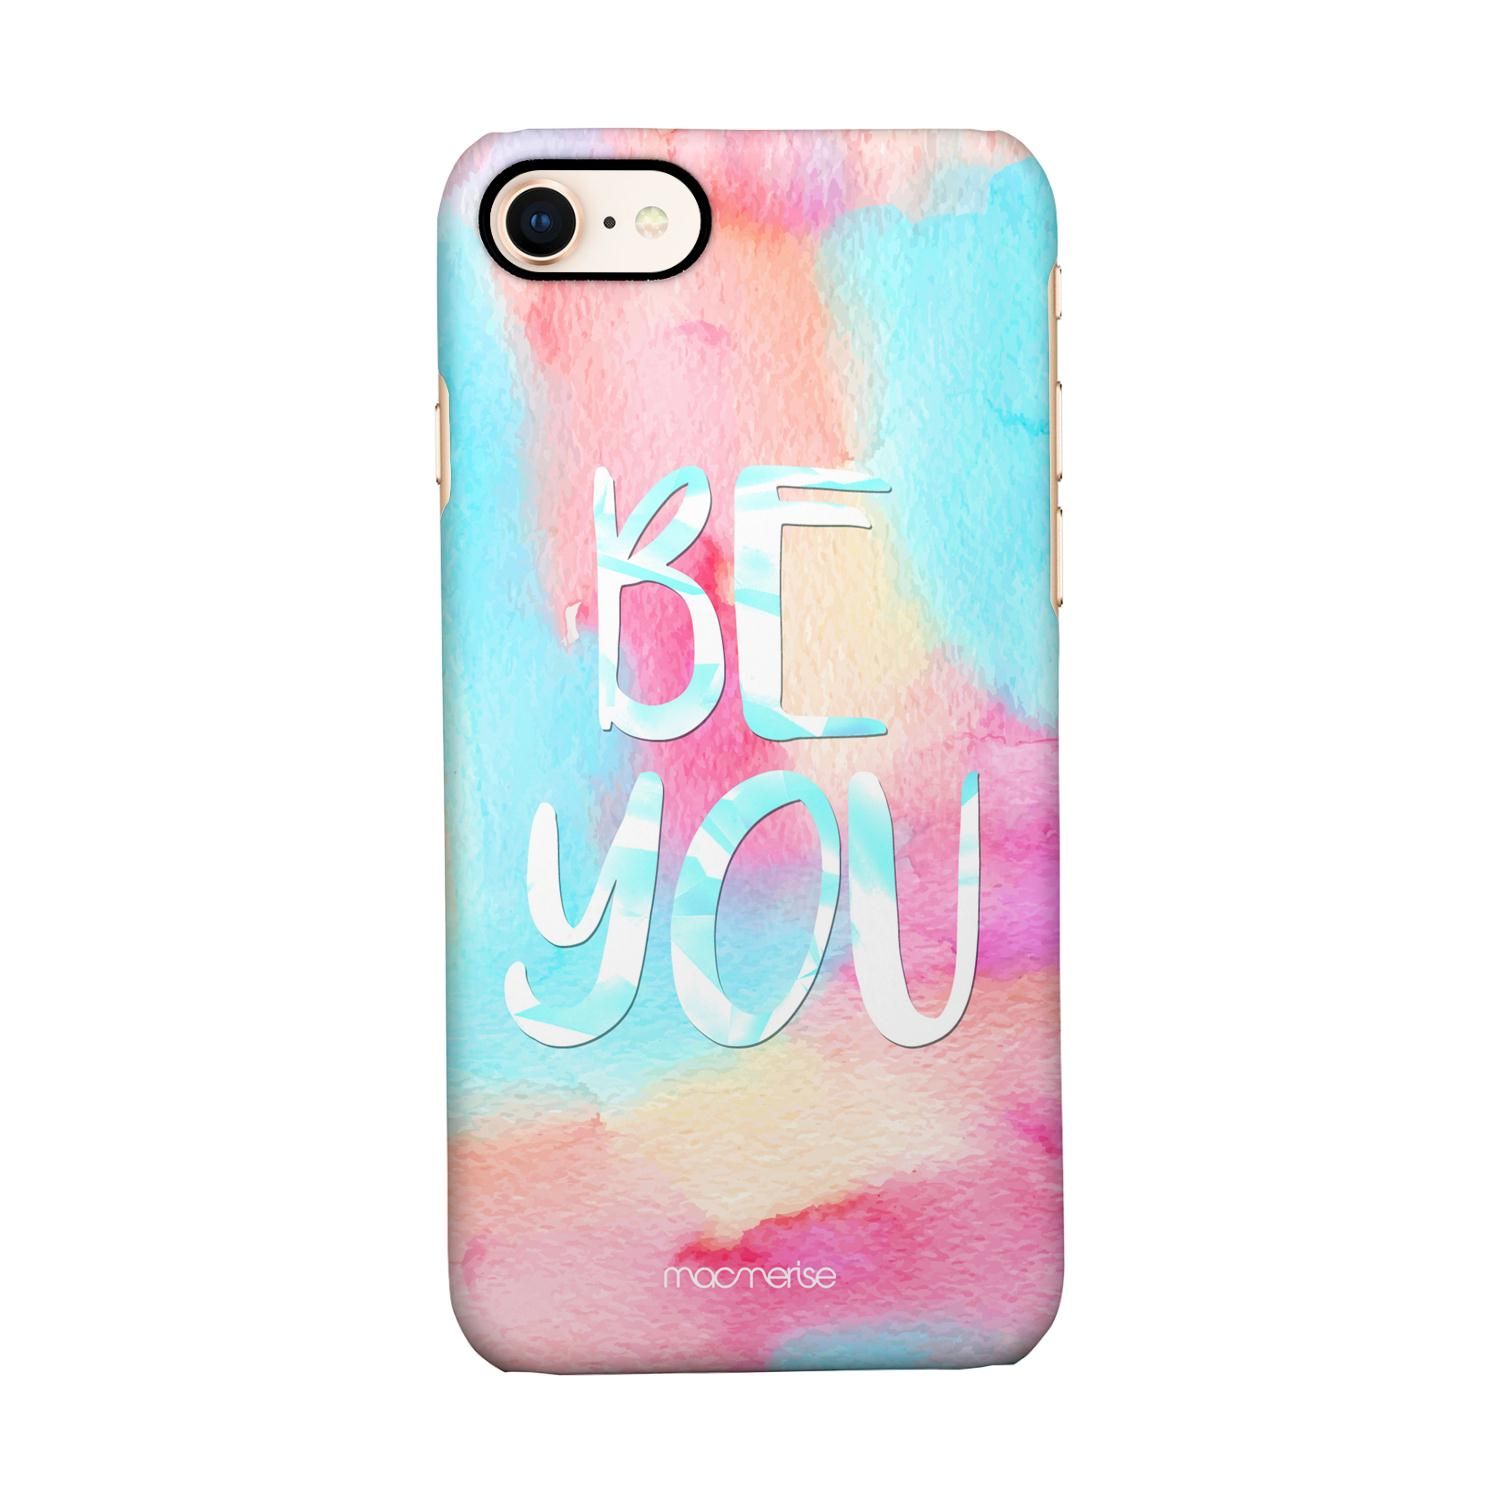 Buy Be You - Sleek Phone Case for iPhone 7 Online